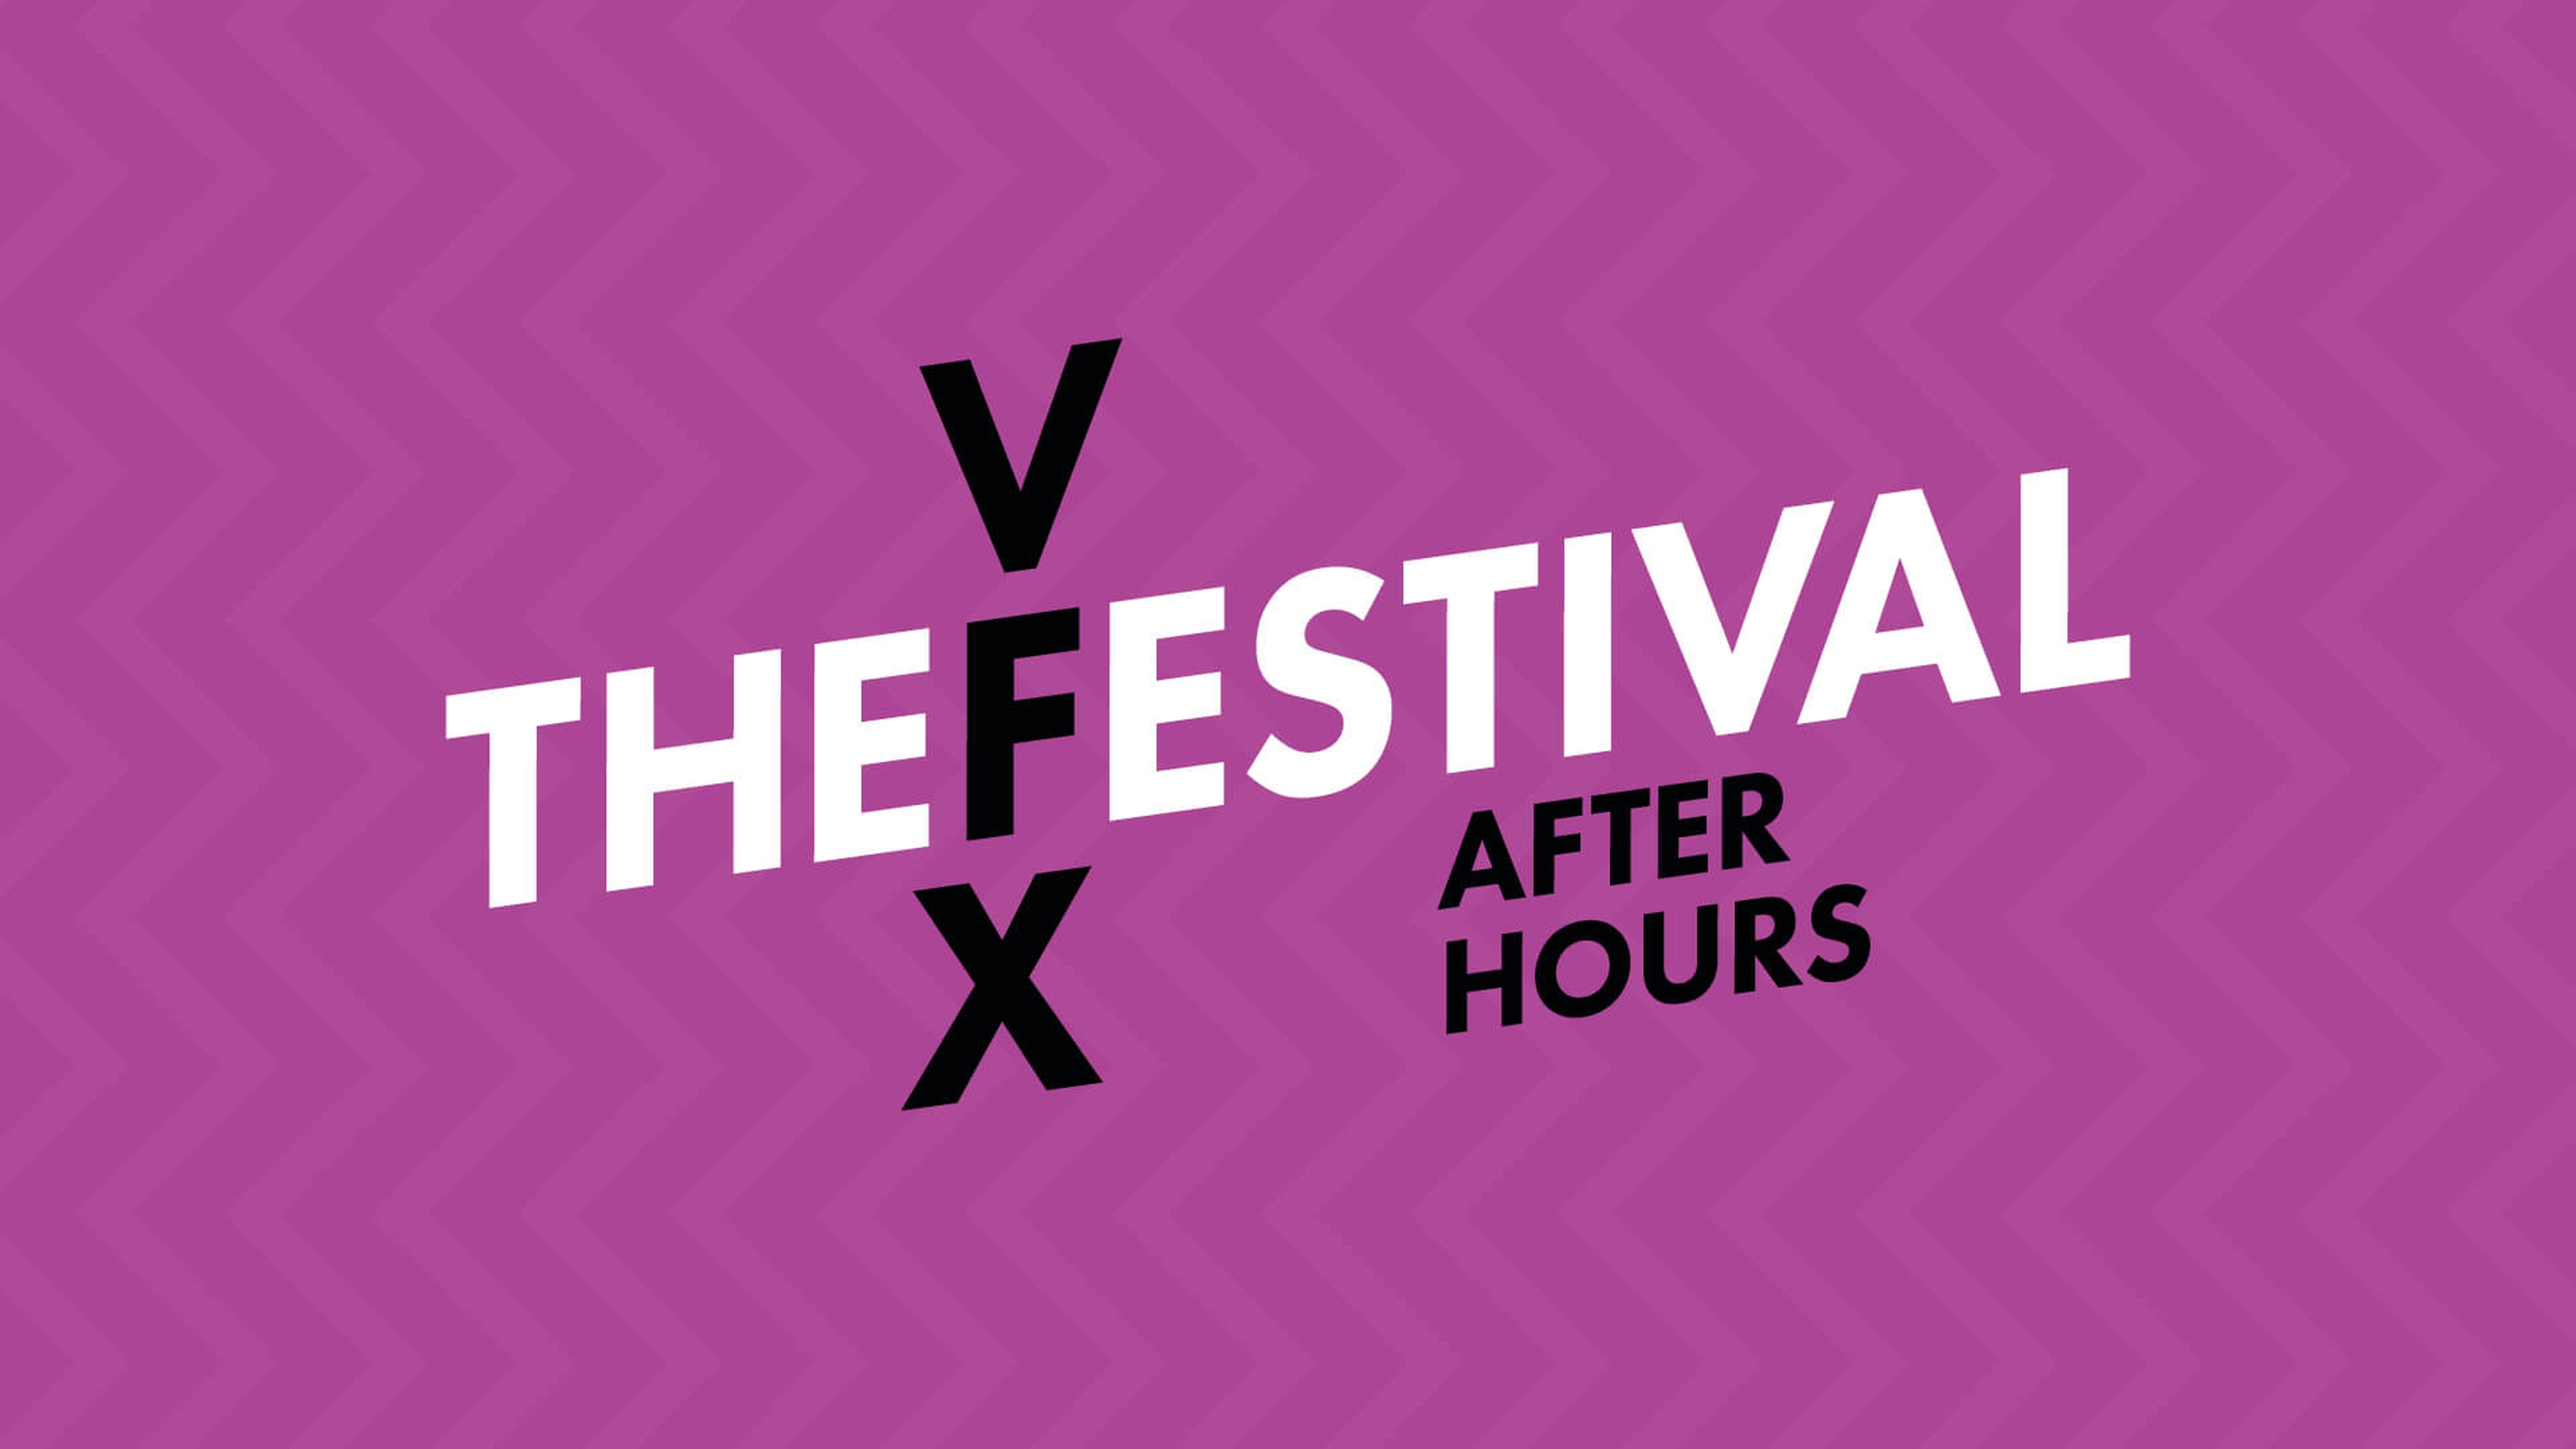 The VFX Festival after hours logo on a purple background